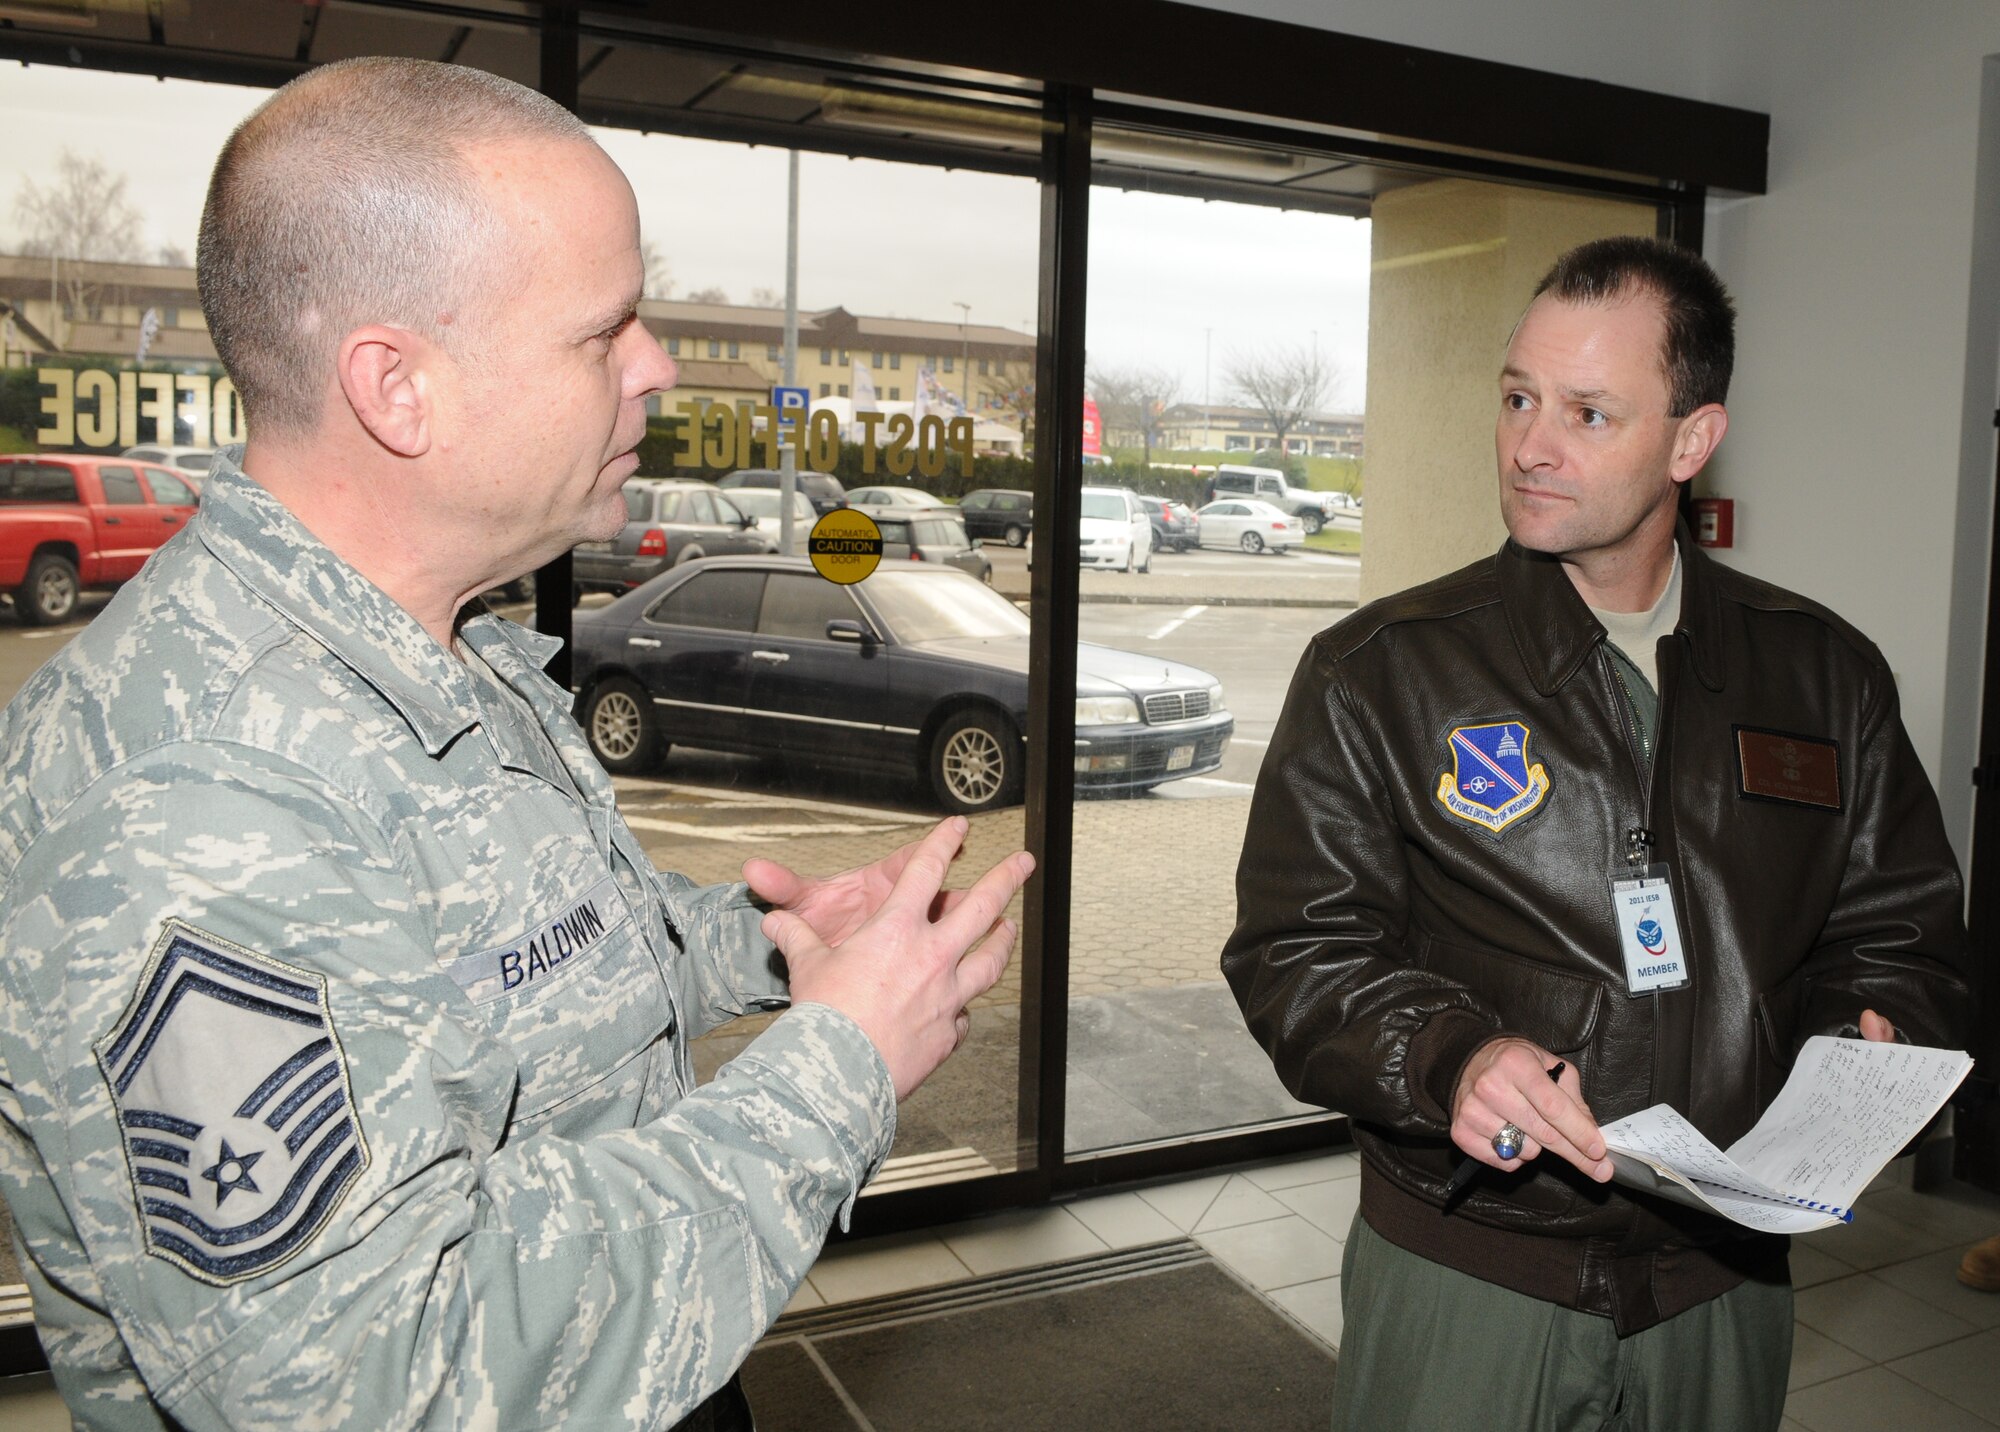 SPANGDAHLEM AIR BASE, Germany – Senior Master Sgt. Kirk Baldwin, 52nd Communications Squadron postal operations superintendant, speaks to Col. Kenneth R. Rizer, 11th Wing commander from Joint Base Andrews, Md., about postal operations here Jan. 26 in the post office. Colonel Rizer visited the base as part of an Installation Excellence Selection Board that visited the base to conduct a two-day evaluation to determine the Air Force's Installation Excellence and Special Recognition Award winners. Spangdahlem AB is competing against Travis Air Force Base, Calif., for this year's IEA. The base that wins receives $1 million to increase quality of life. (U.S. Air Force photo/Senior Airman Nick Wilson)